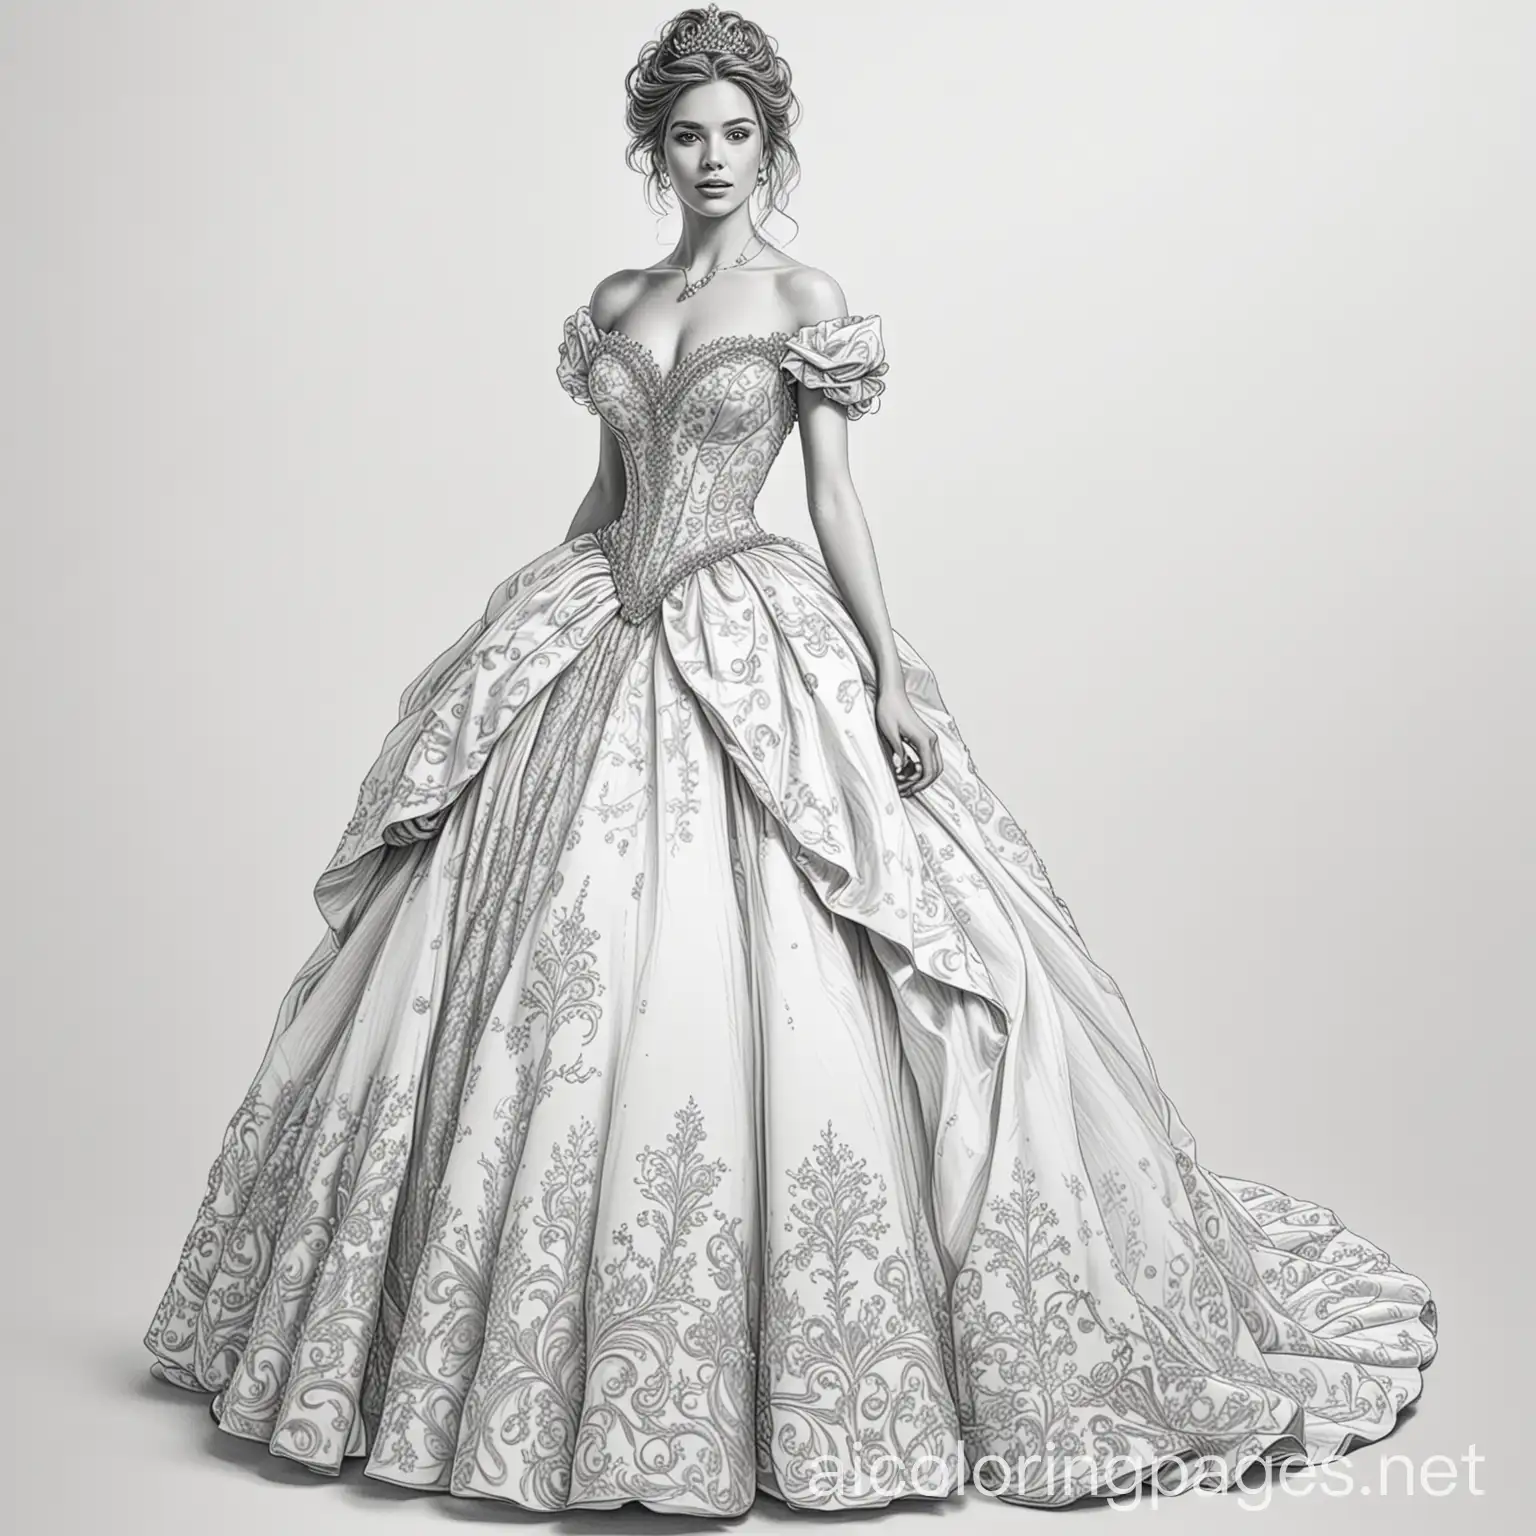 A detailed young woman with an extravagant ballgown, Coloring Page, black and white, line art, white background, Simplicity, Ample White Space.